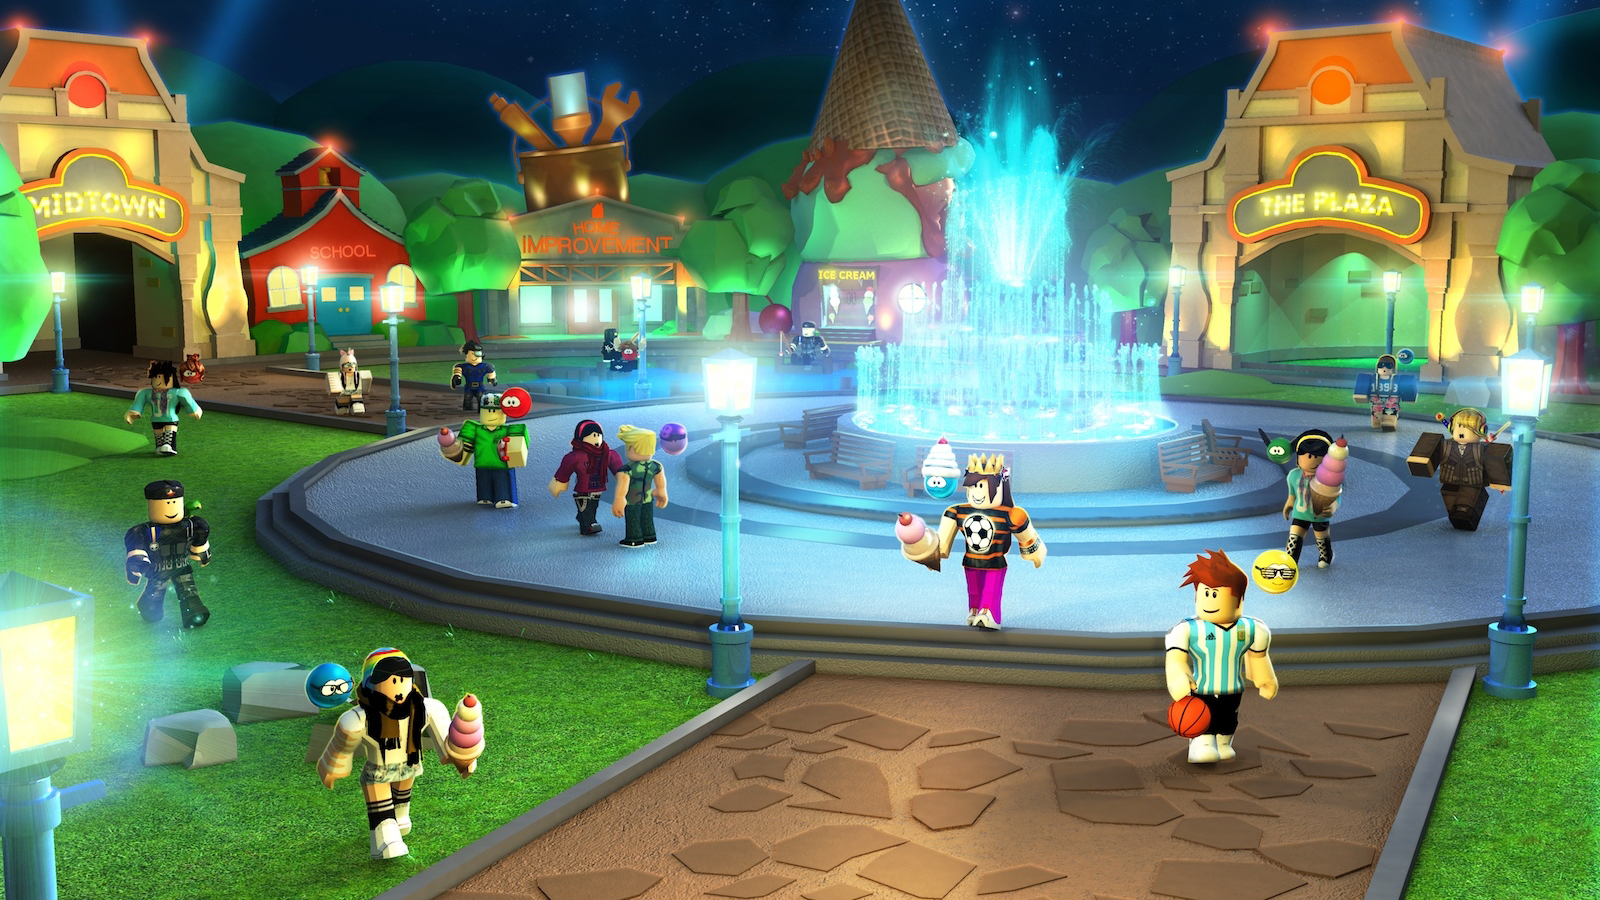 Roblox Enables 'Illicit Gambling' for Kids, Lawsuit Alleges